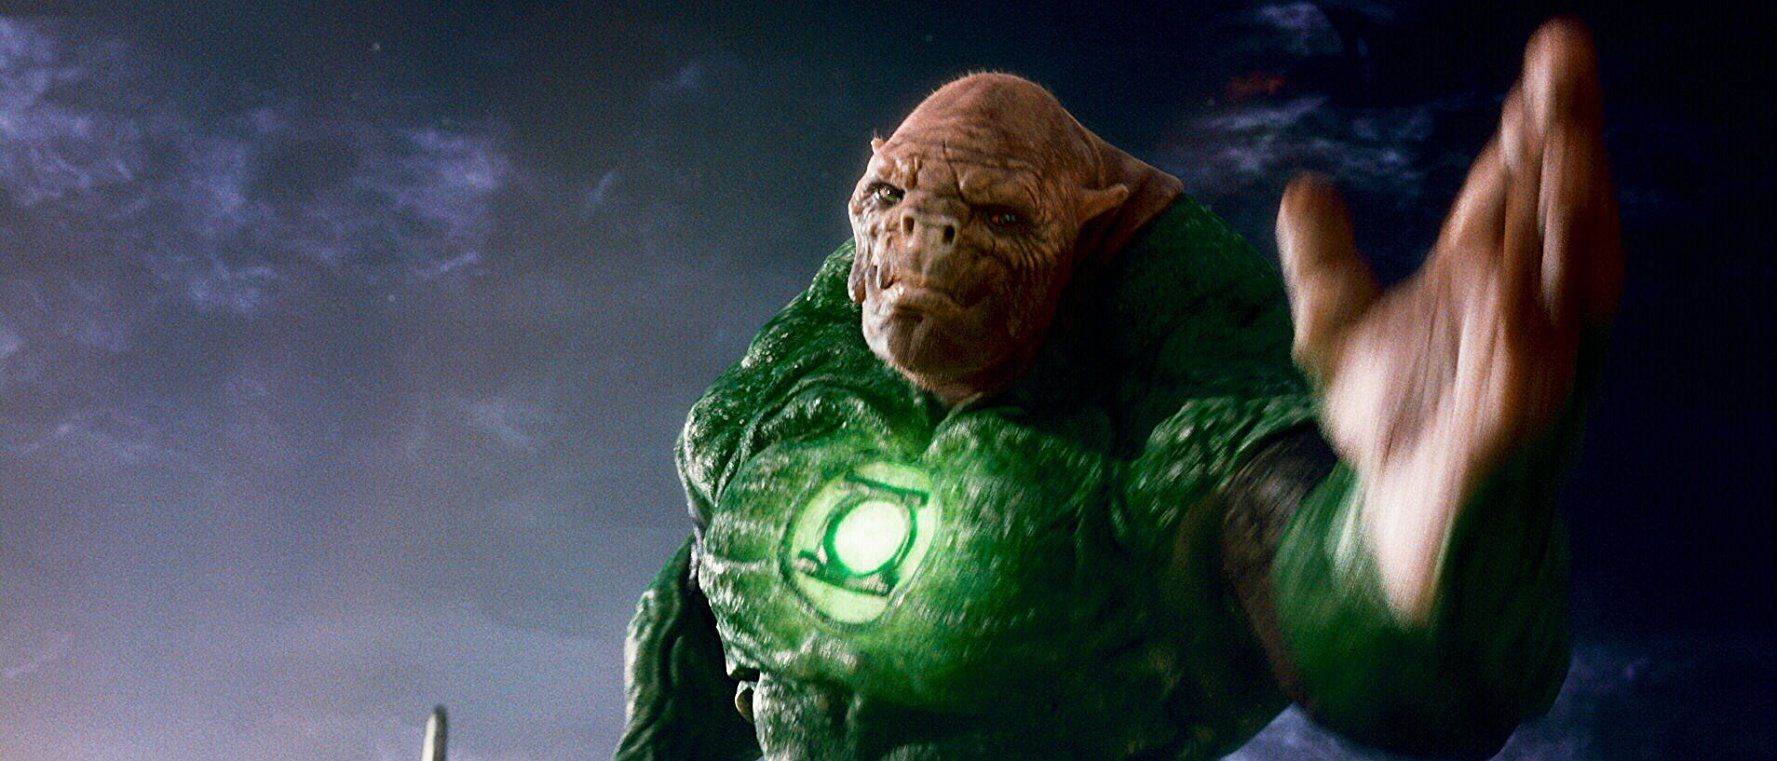 Watch Movies and TV Shows with character Kilowog for free! List of Movies: Green Lantern: The Animated Series Green Lantern: Emerald Knights